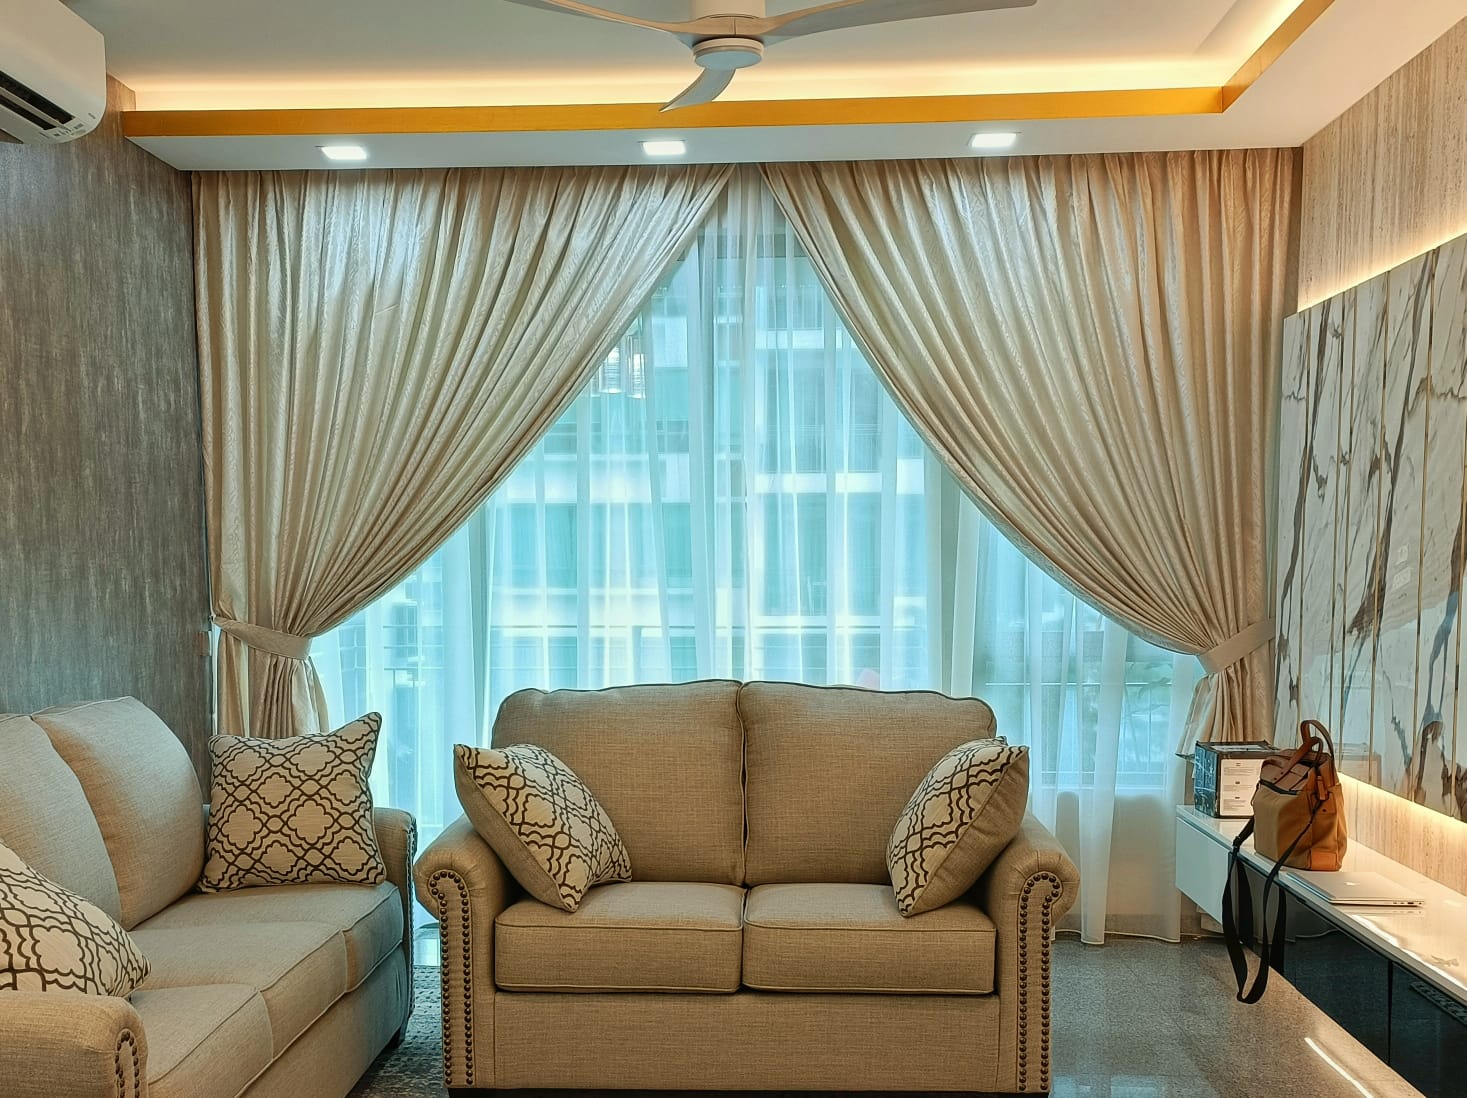 Singapore Curtain Shop, This is a Picture of Day and night curtain for Living Hall at Casa Merah Singapore, installed on 25th Oct 2021